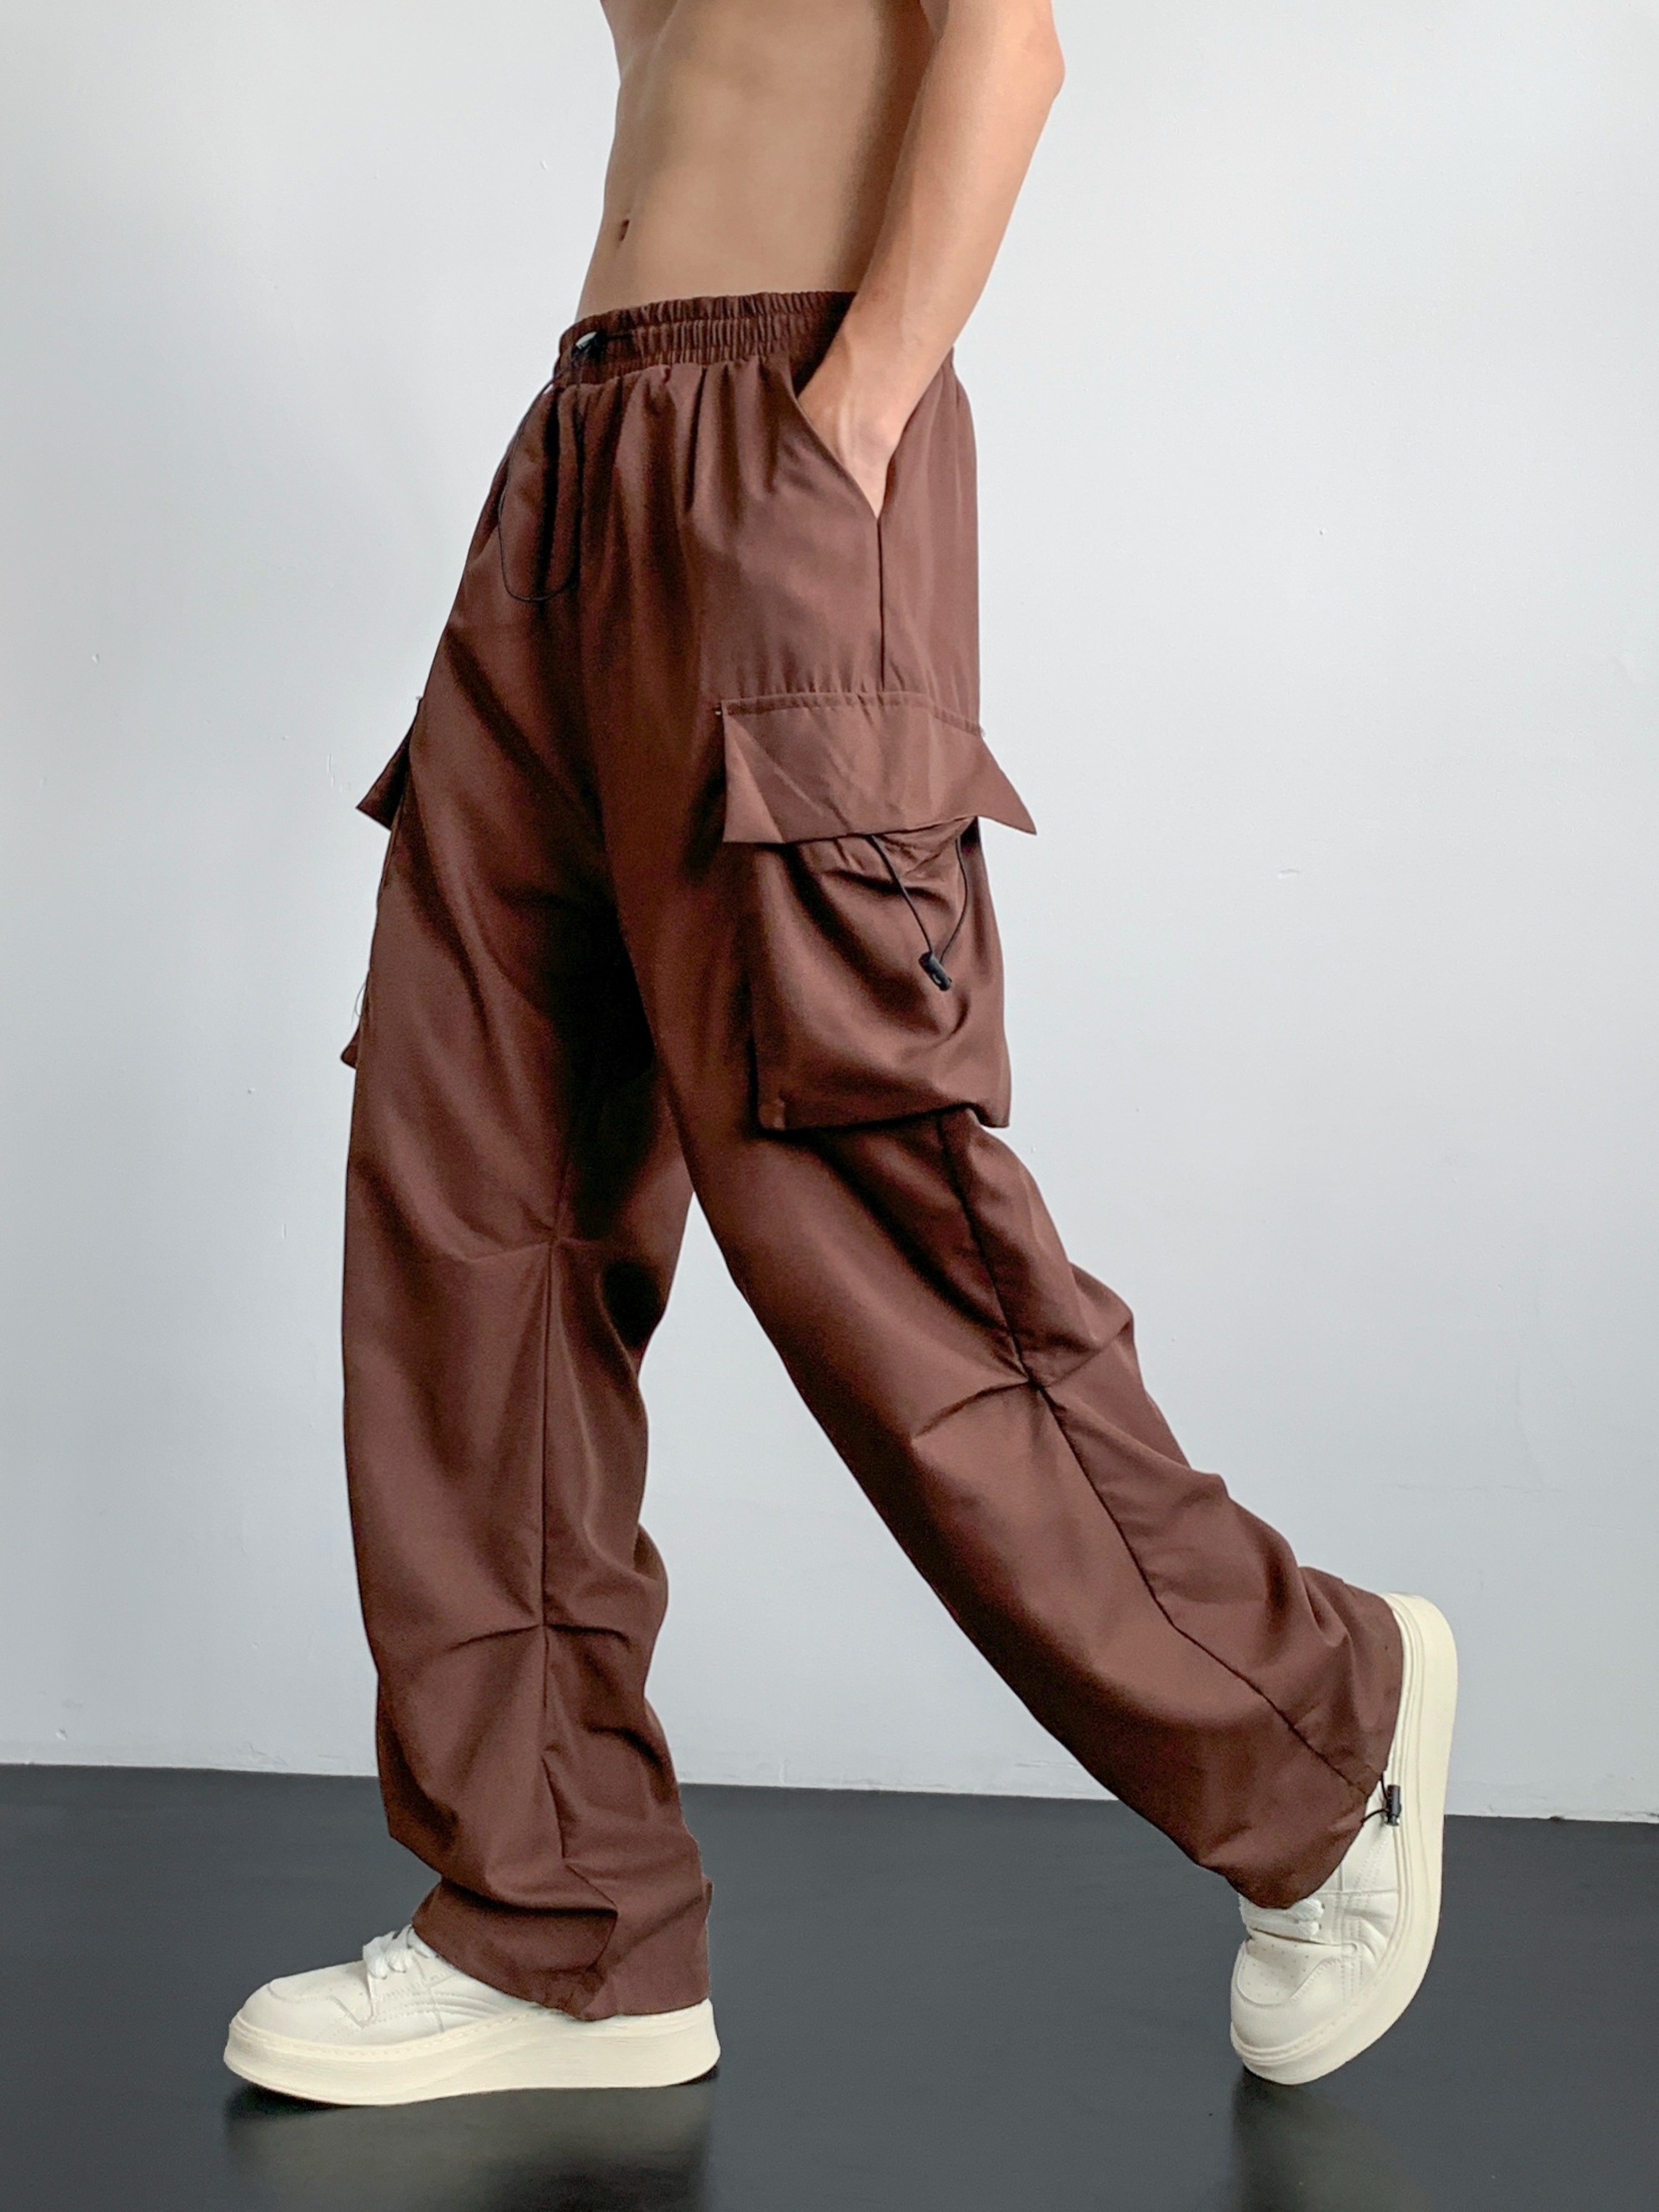 Womens Cargo Multi Pockets Casual Outdoor Loose Pants Long Straight Leg  Trousers